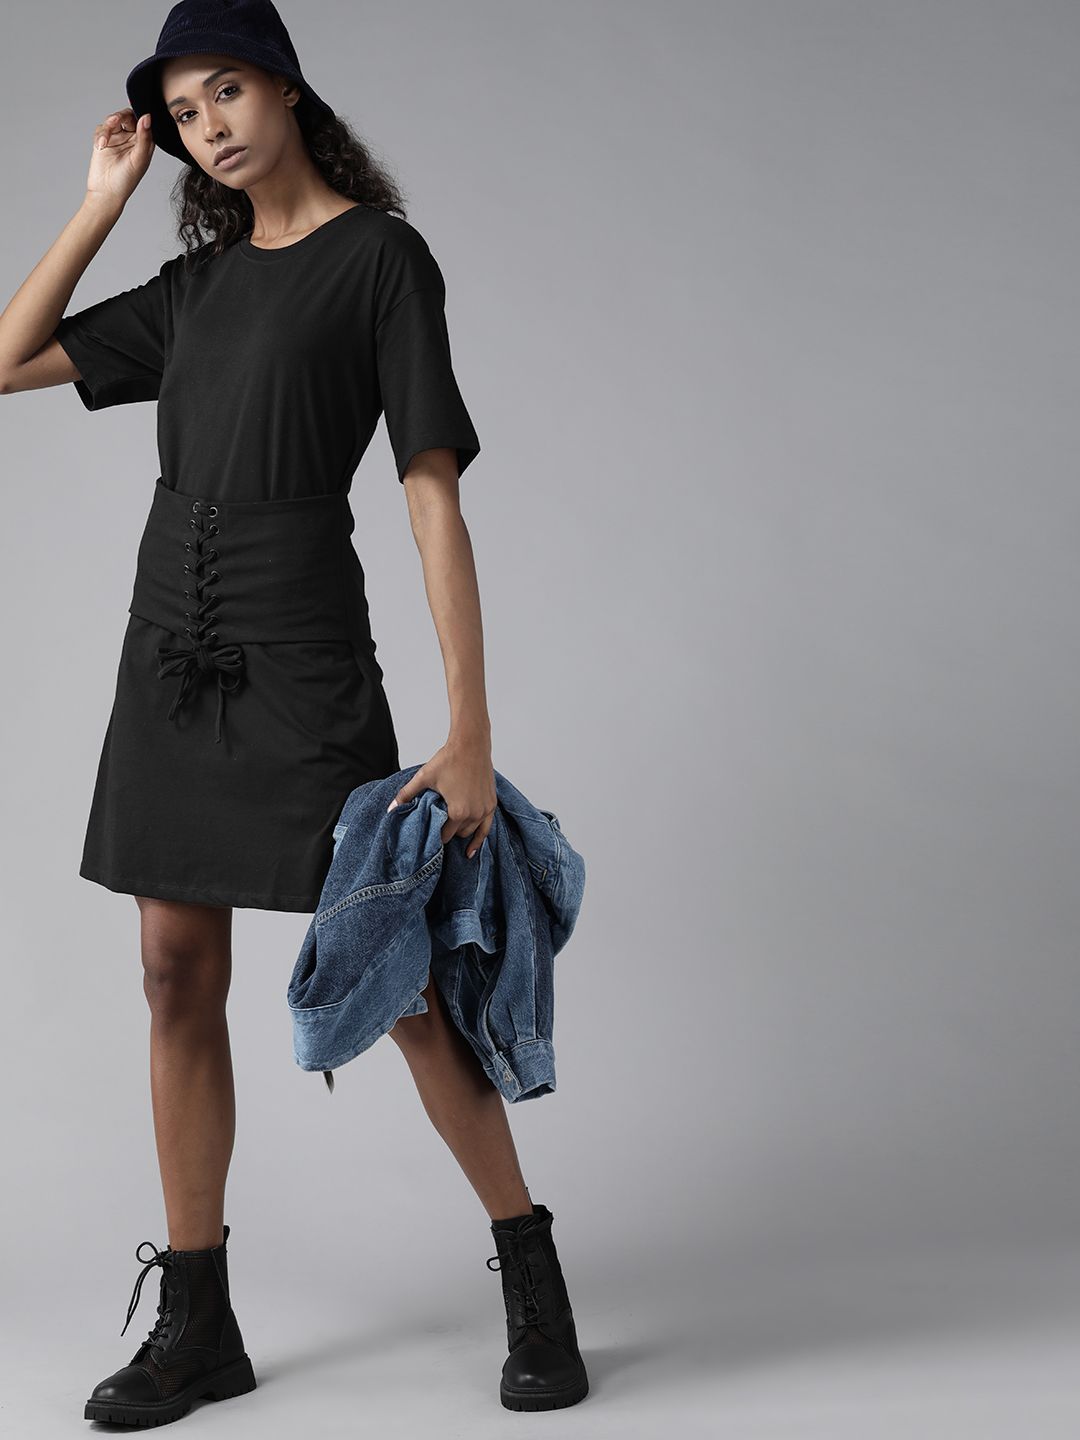 Roadster Black Solid Lace-Up A-Line Dress Price in India